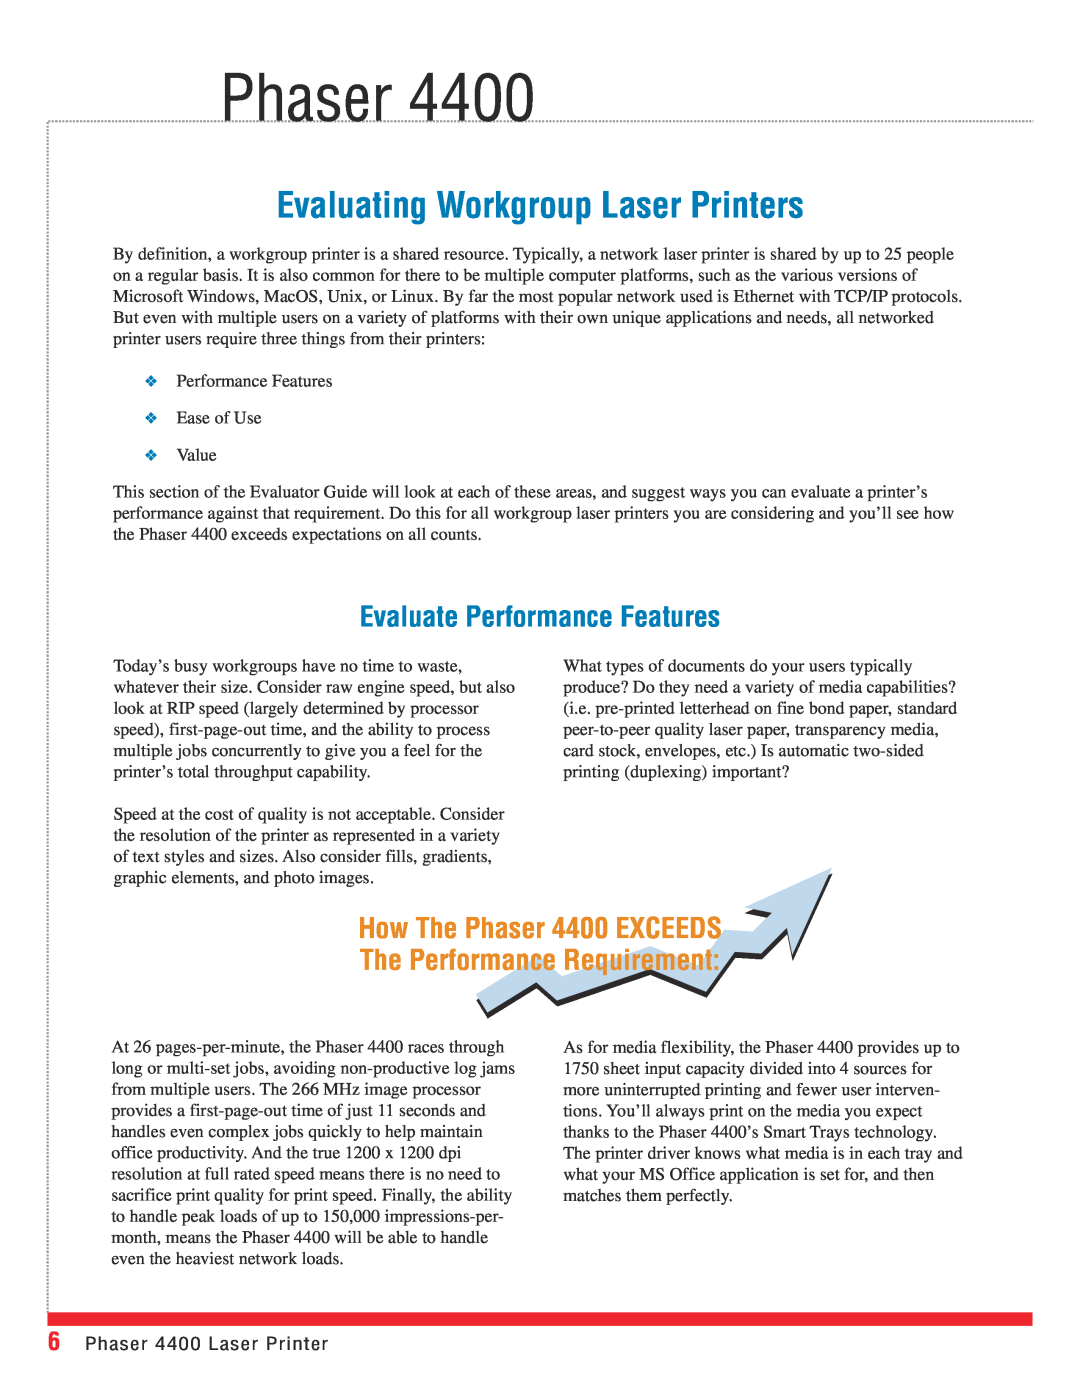 Xerox 4400 manual Evaluating Workgroup Laser Printers, Evaluate Performance Features, Phaser 